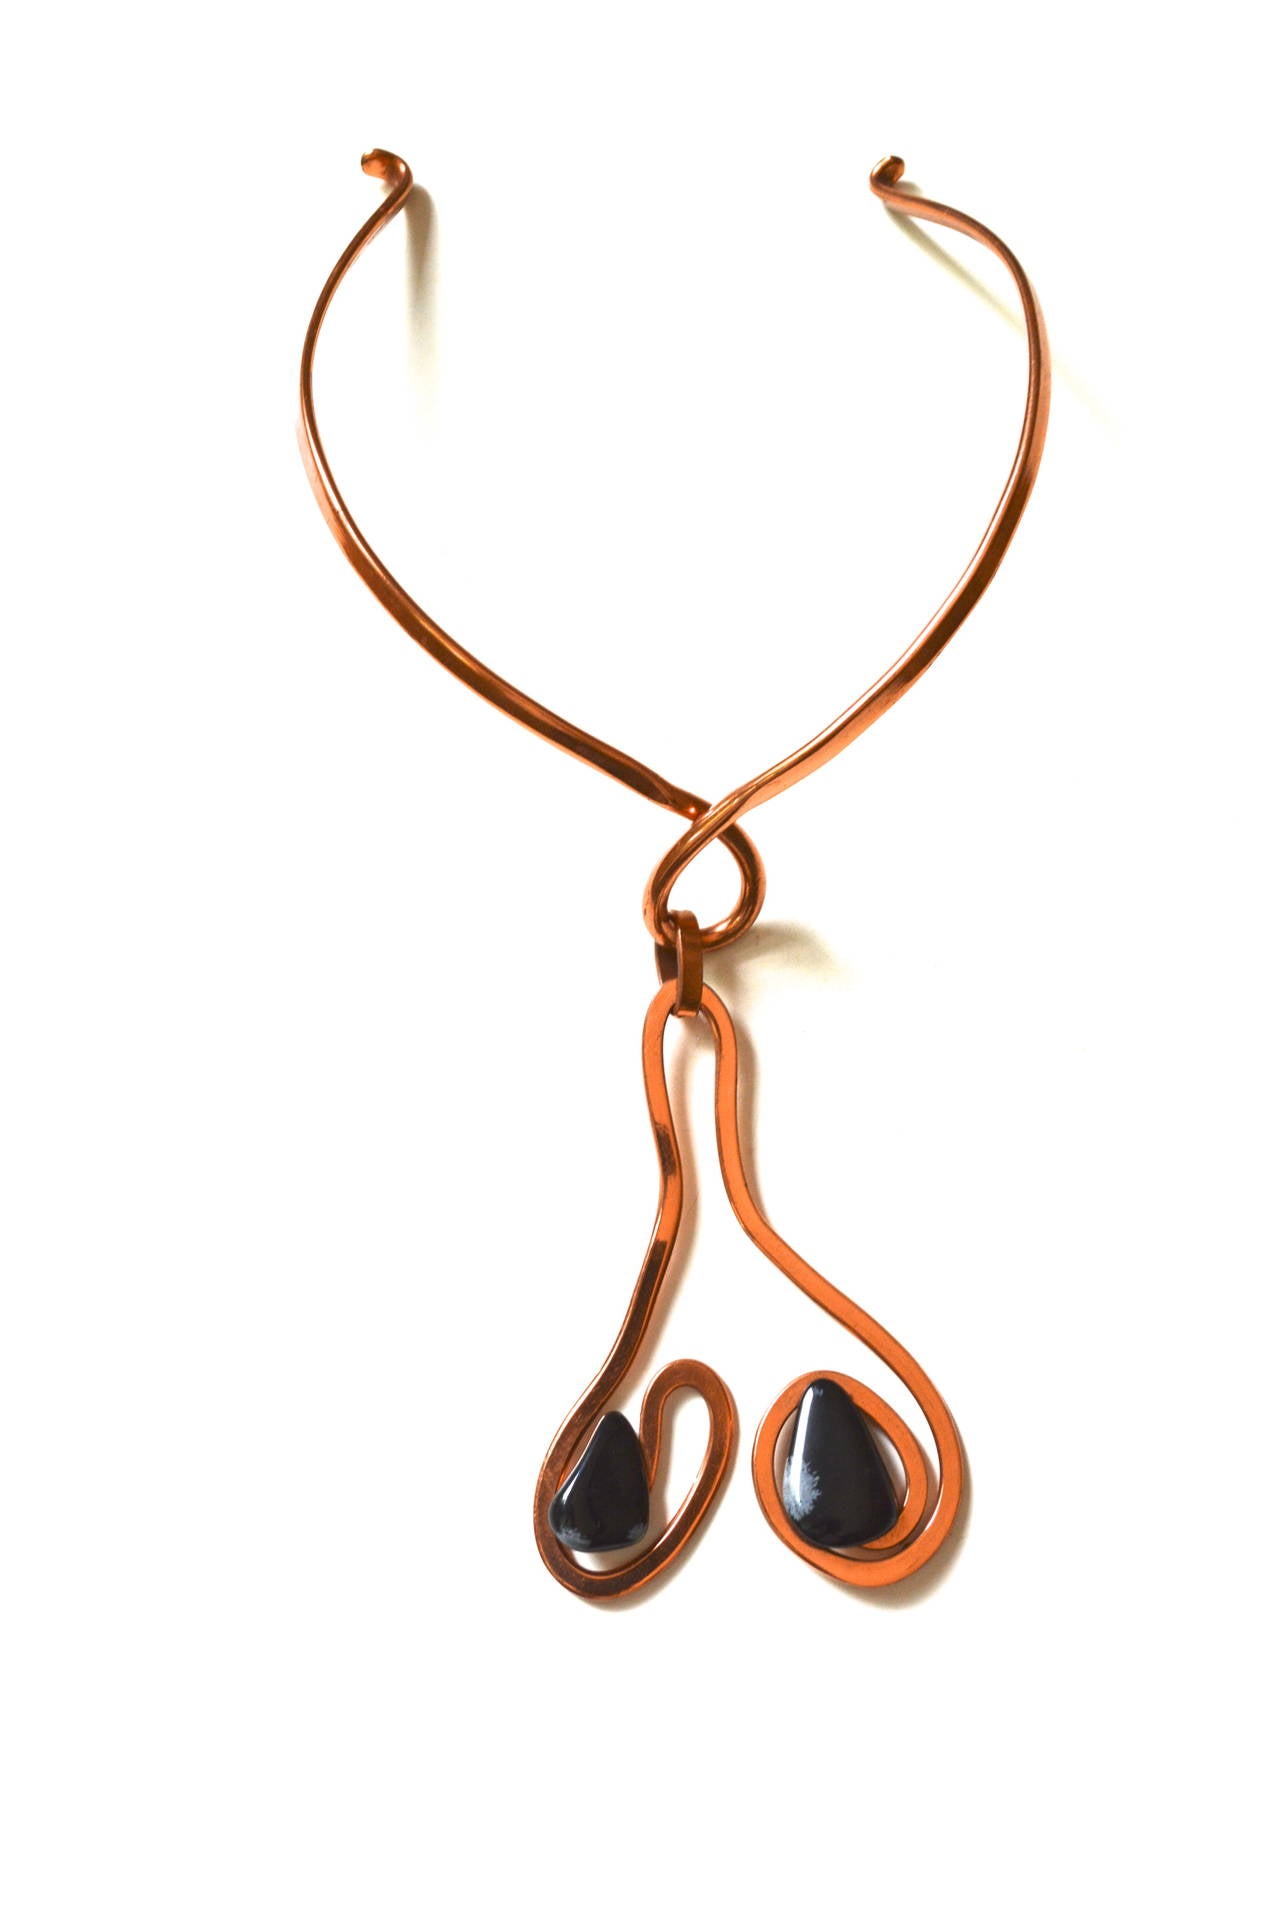 Women's or Men's Mid Century Mod Stone and Copper Necklace